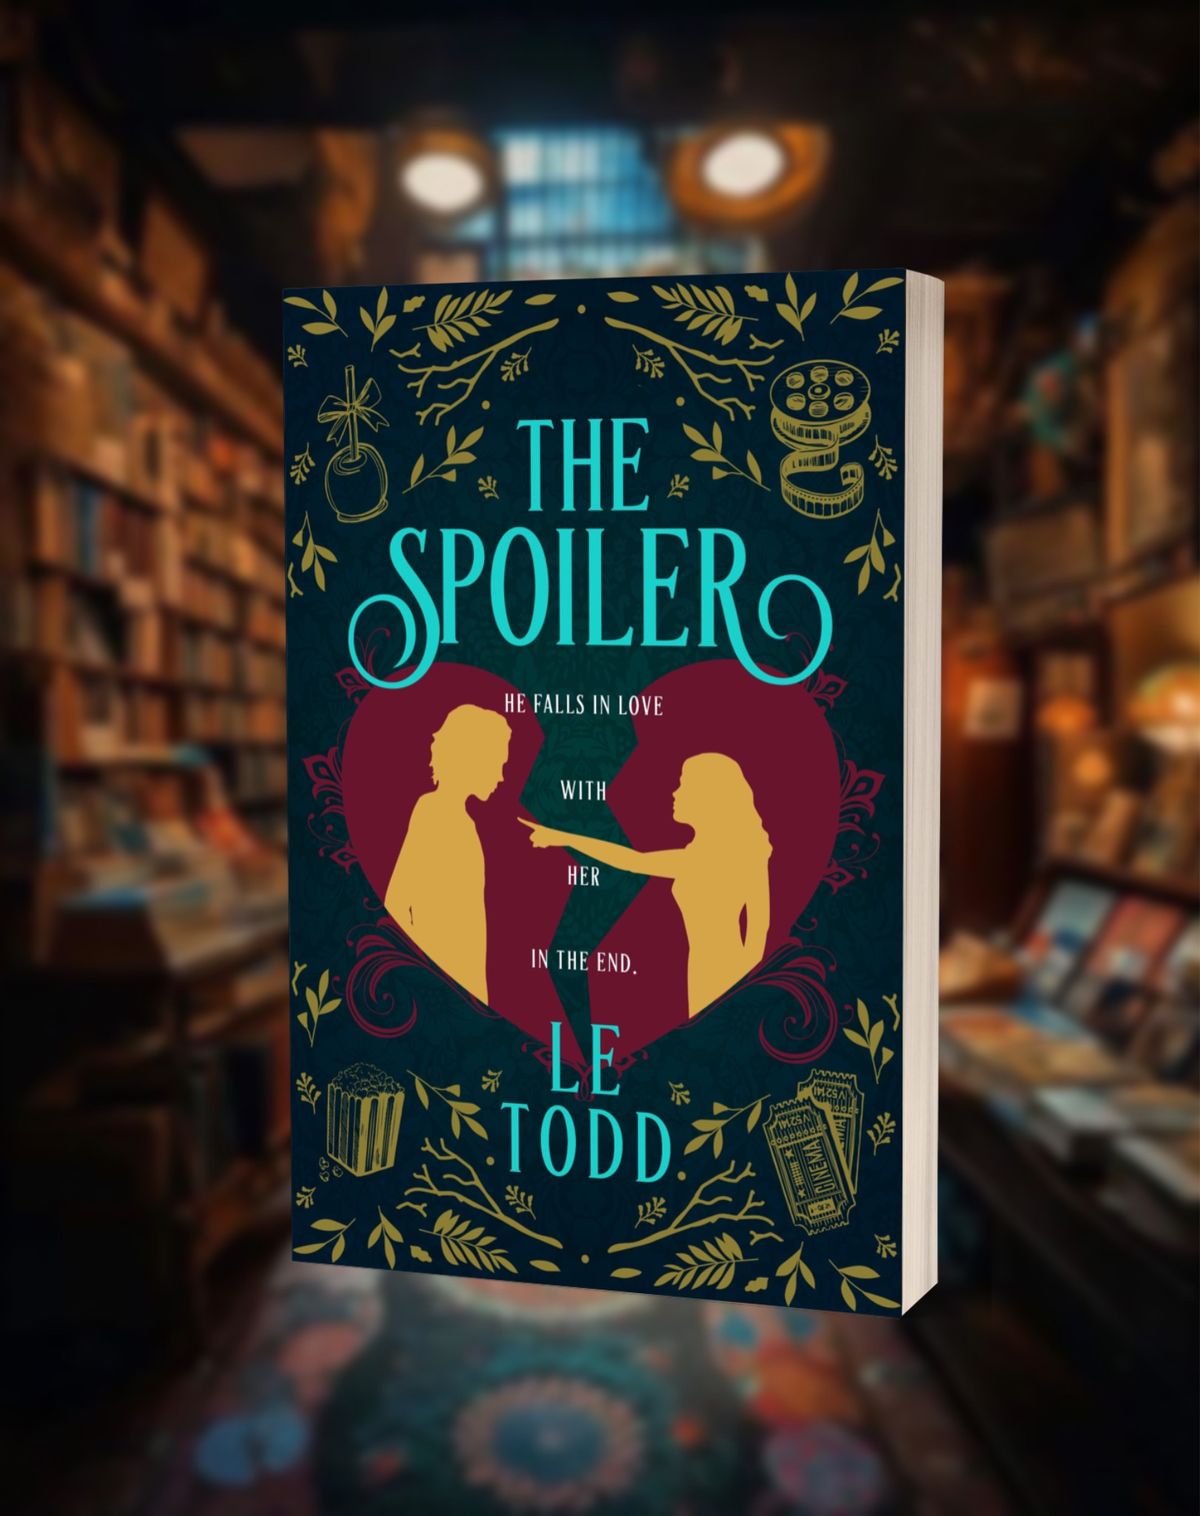 The Spoiler Book Launch Event